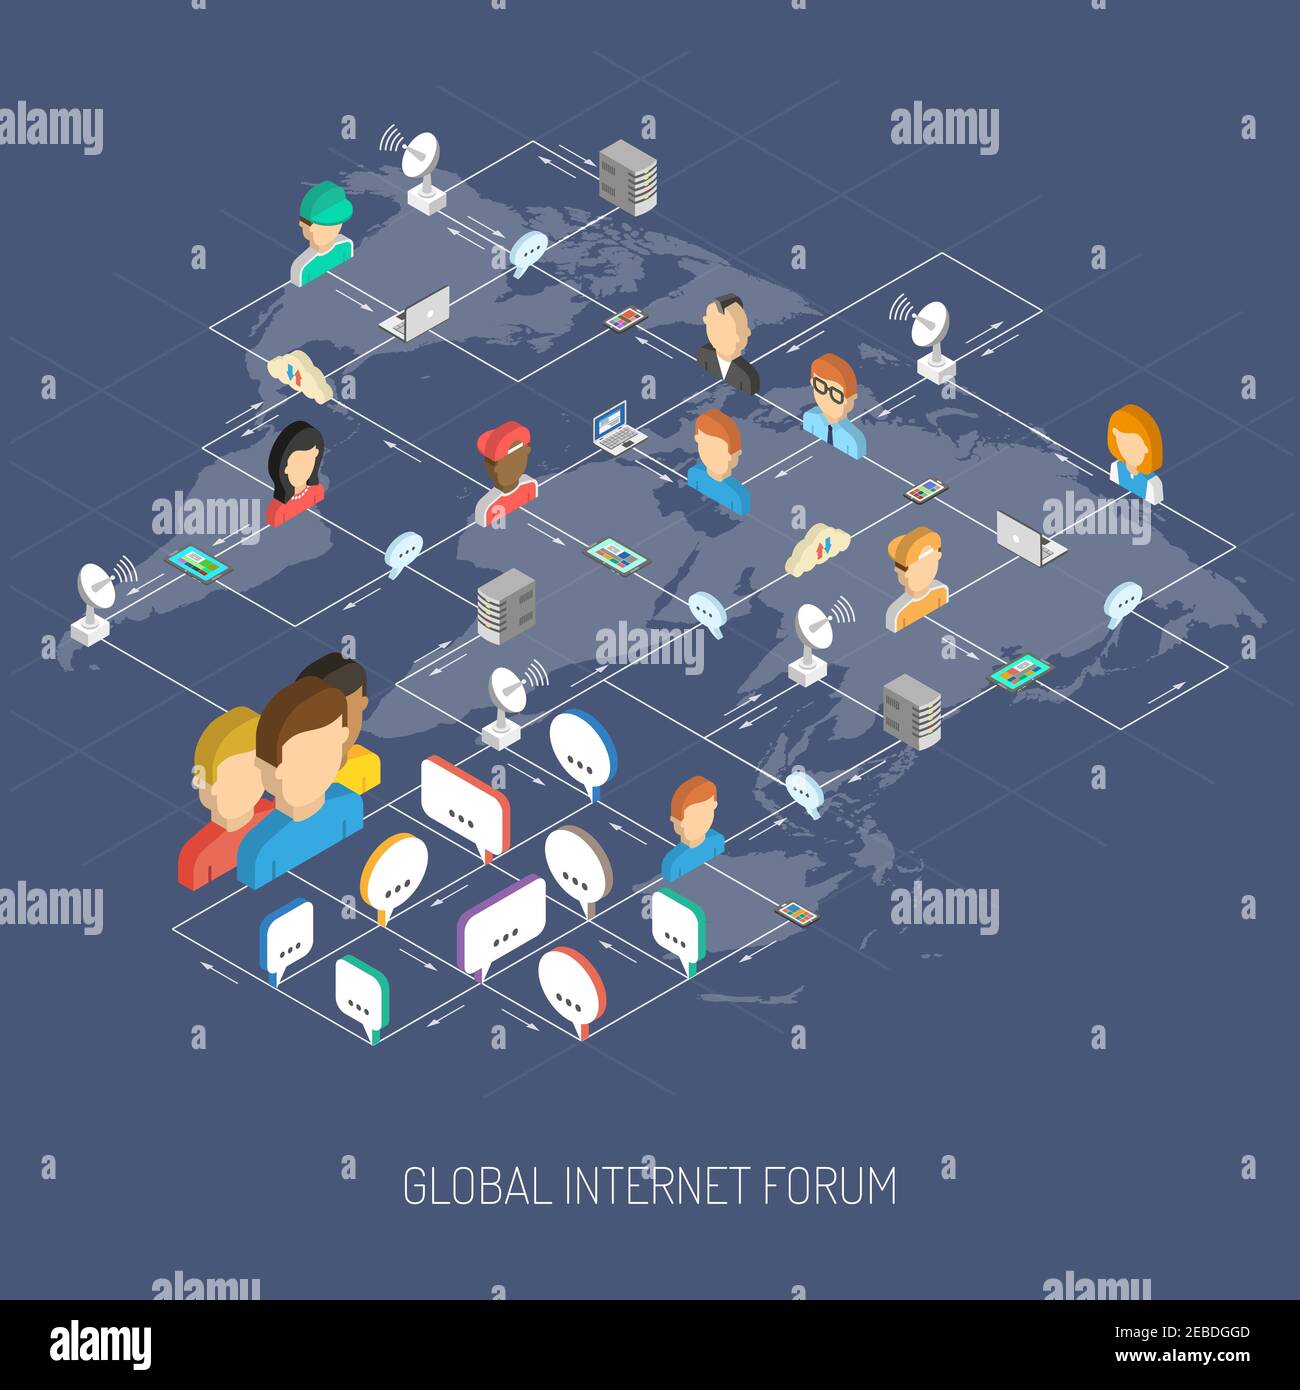 Internet forum concept with isometric people avatars speech bubbles and world map vector illustration Stock Vector